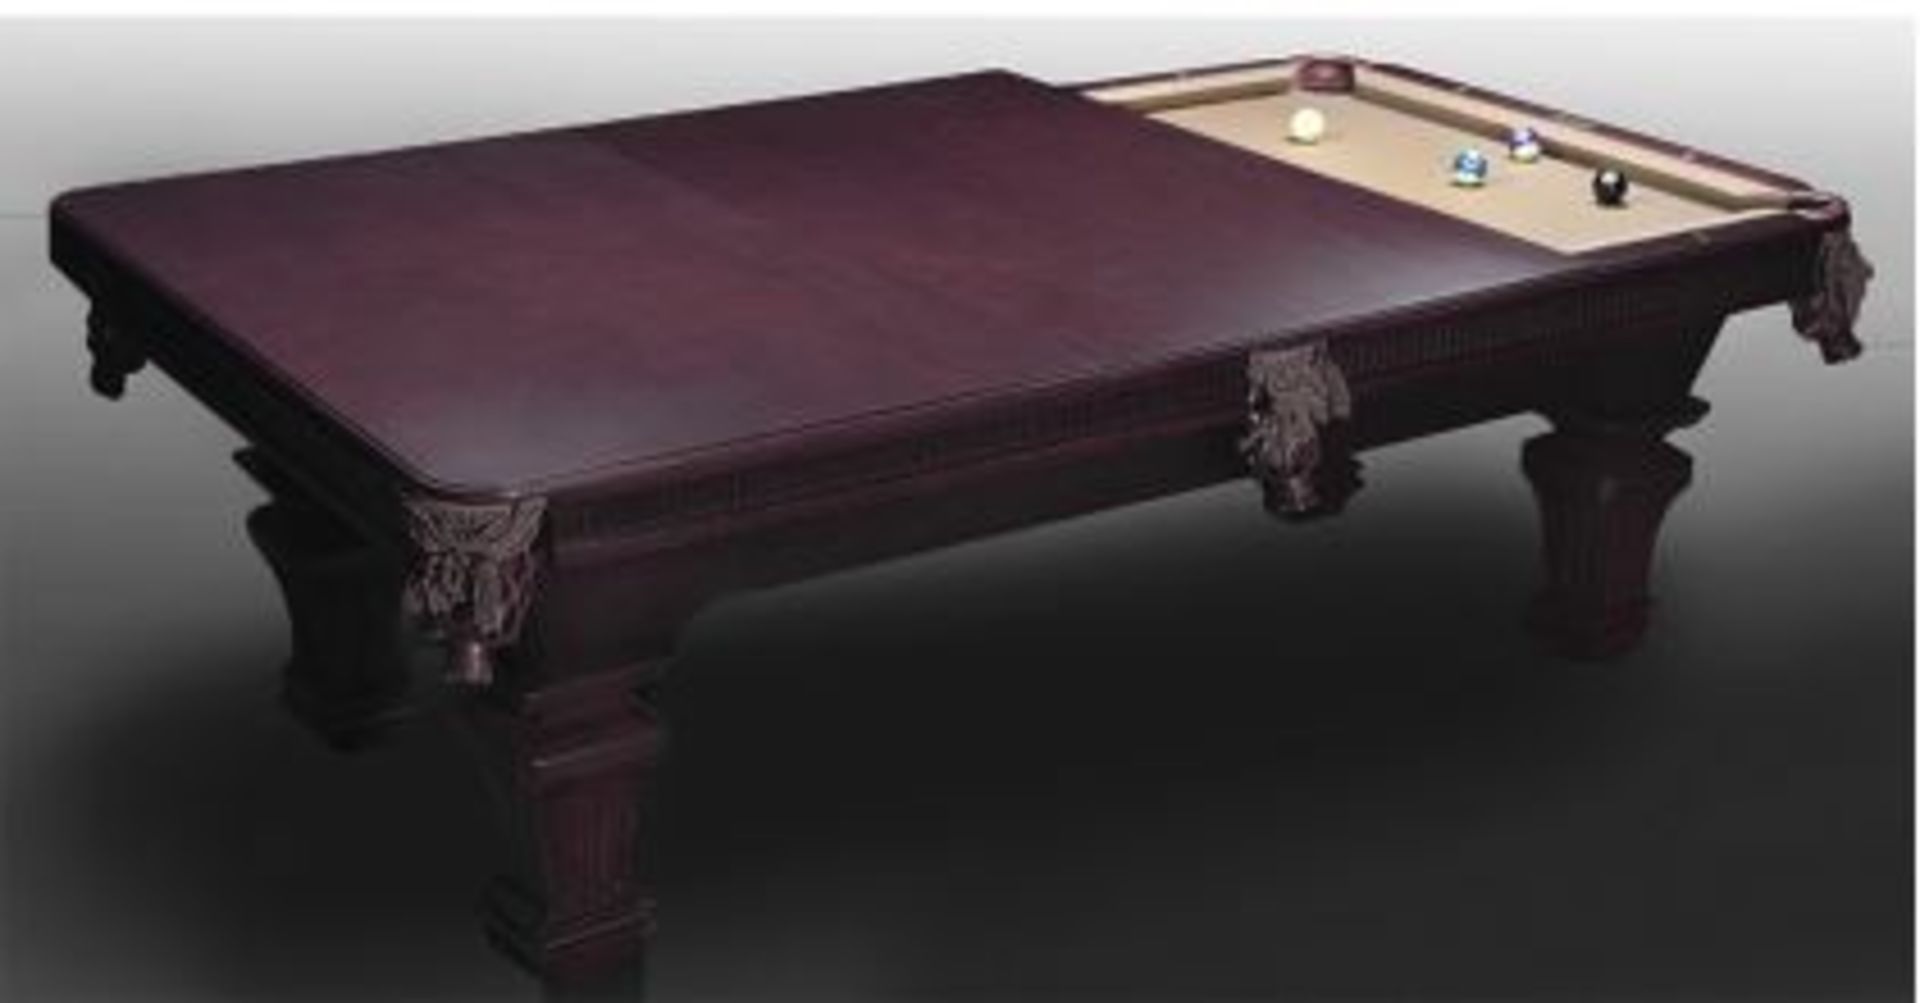 1X, 3PC IMPERIAL WALNUT POOL TABLE DINING TOP ONLY! FITS 4' x 8' POOL TABLE (NO POOL TABLE INC.)